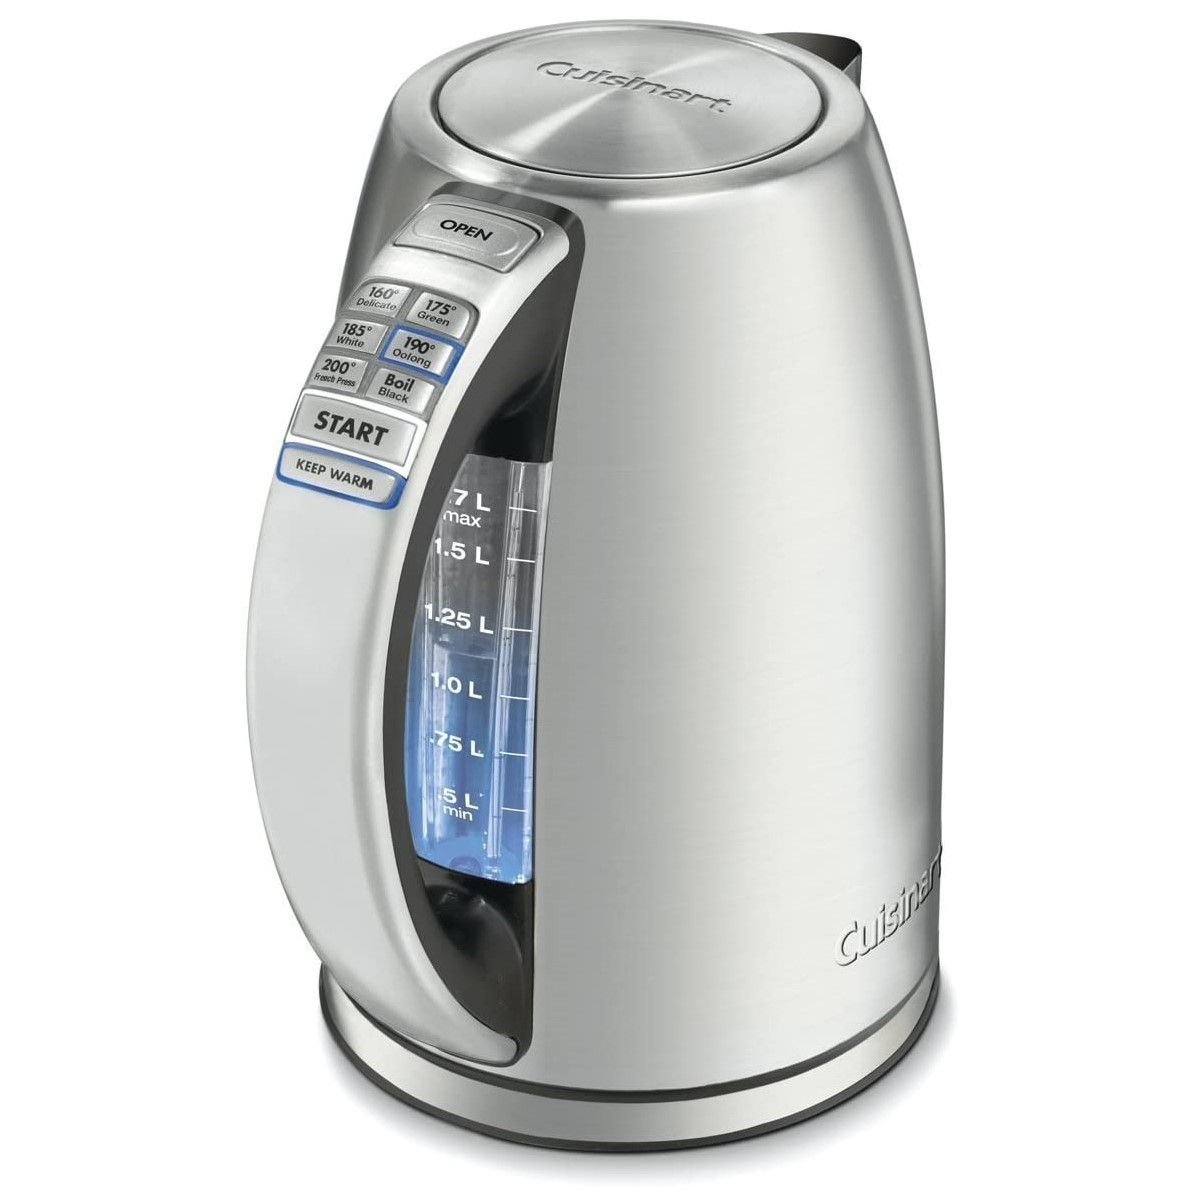 1.7-Liter Electric Kettle 1500 W Tea Kettle with One-Touch Activation